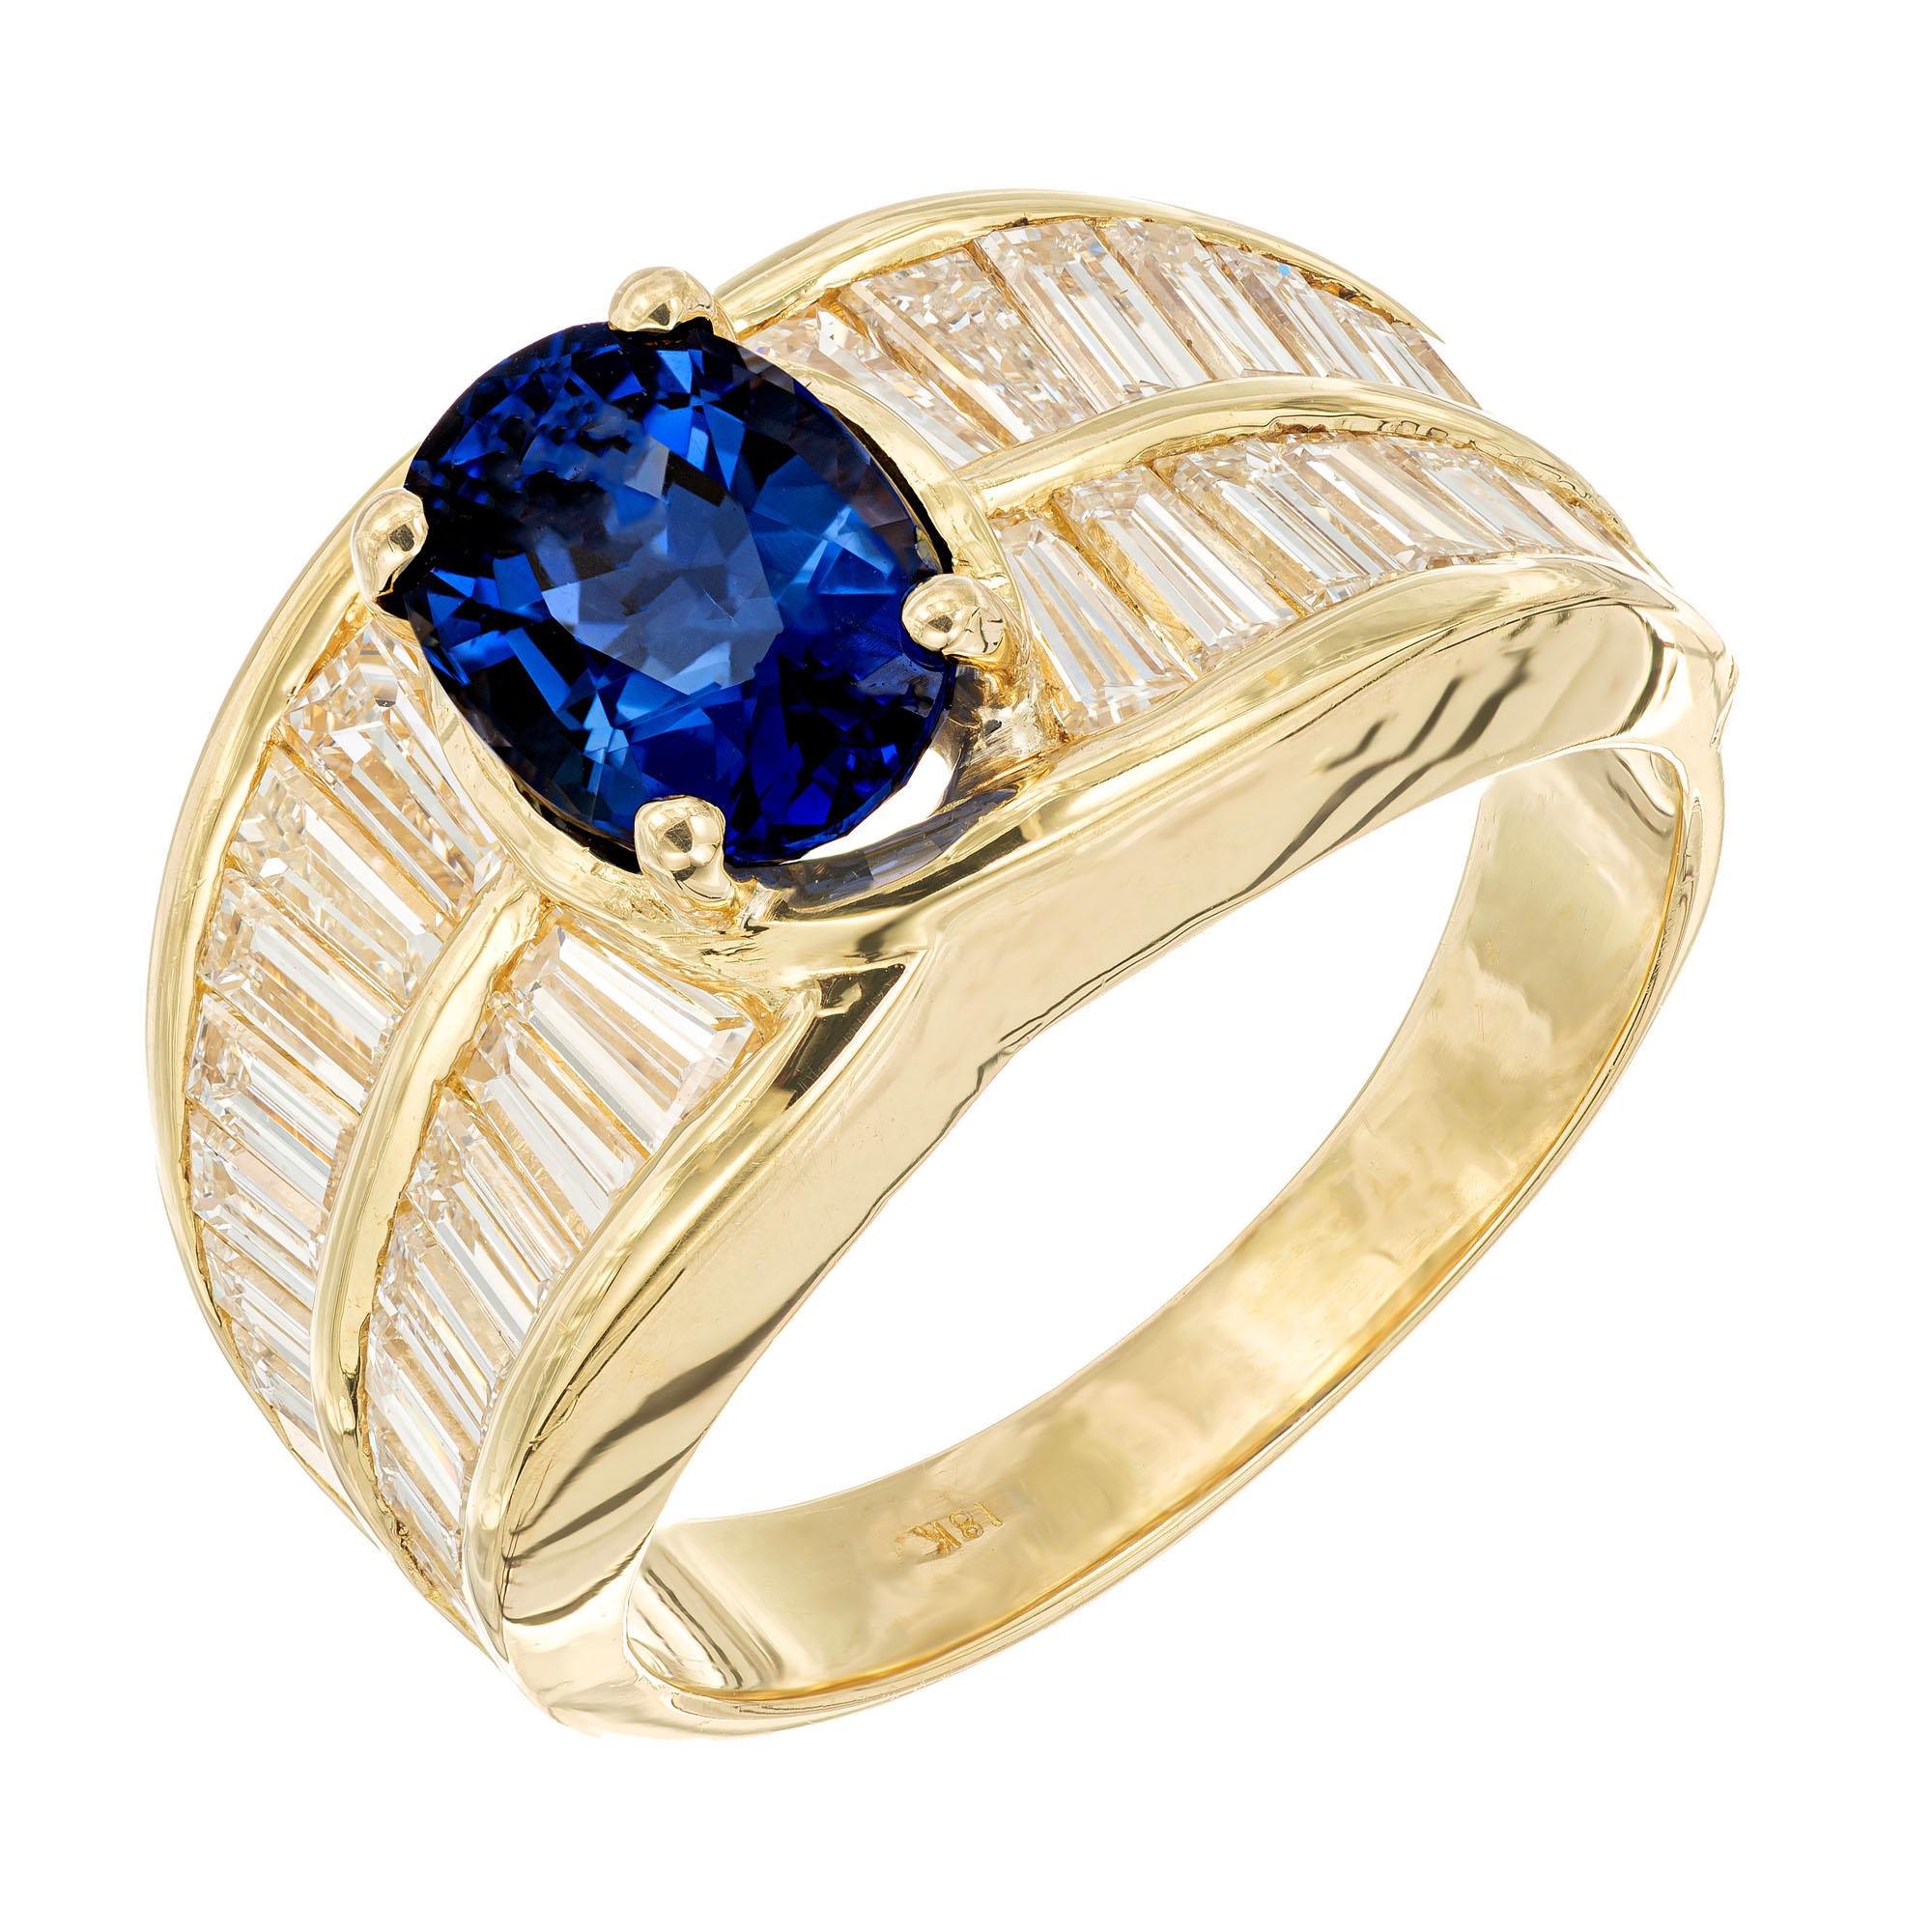 1940's Sapphire and diamond cocktail ring. GIA certified oval sapphire center stone accented with 32 straight and tapered baguette diamonds in a 18k yellow gold setting. GIA certified as natural, no heat or enhancements. Designed and crafted in the